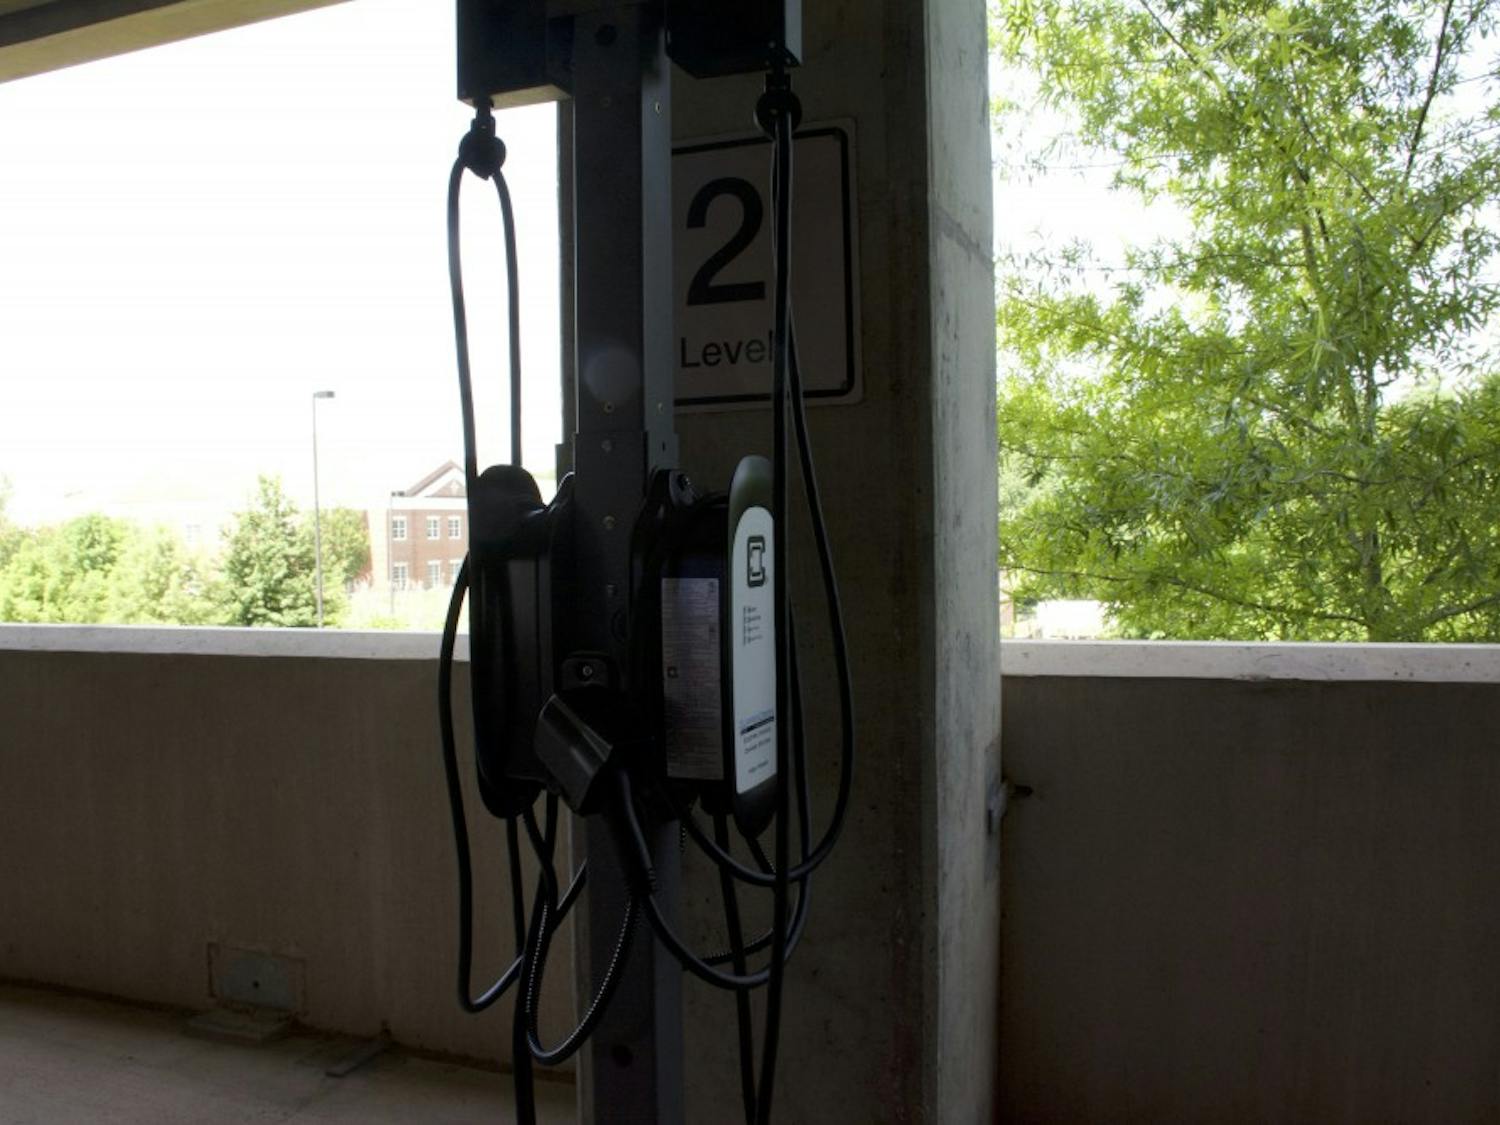 Auburn University adds electric car chargers in select locations on campus.&nbsp;